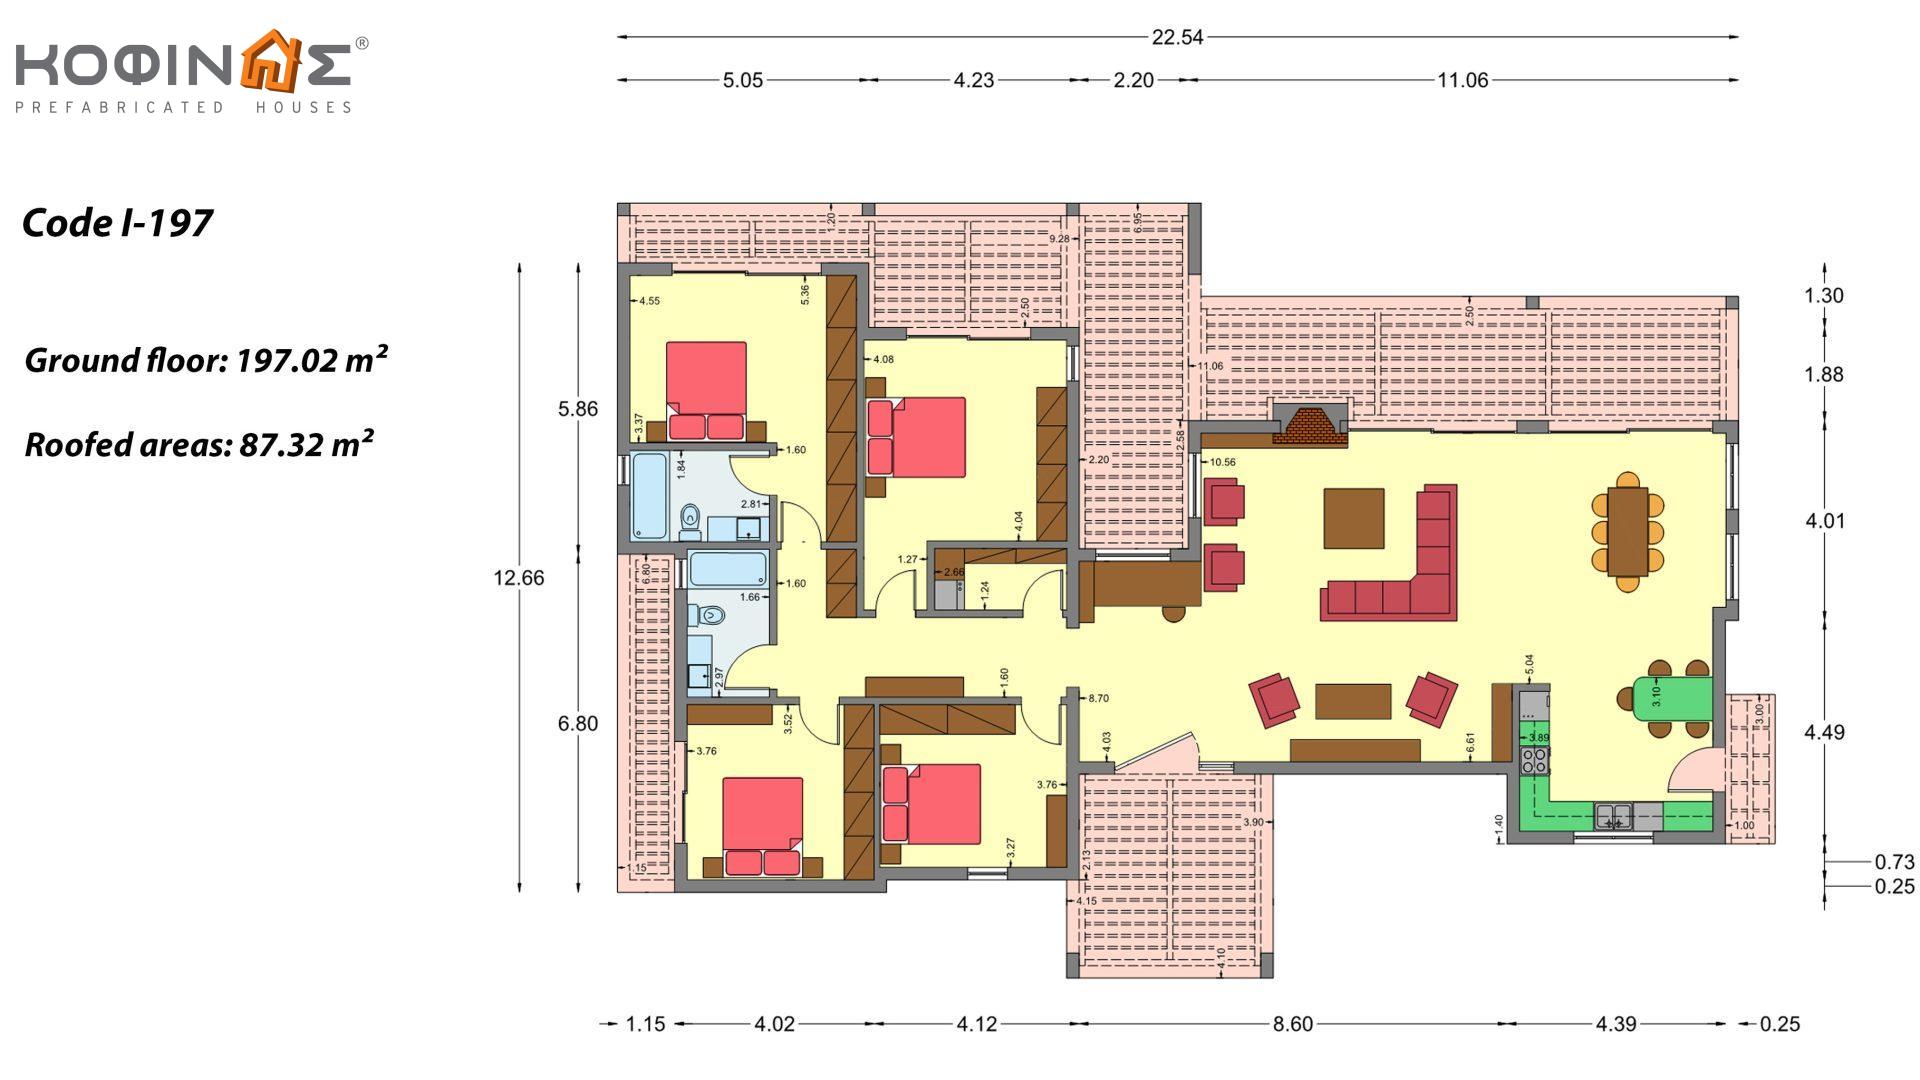 1-story house Ι-197, total surface of 197.02 m², Covered roofed areas 87,32 m²